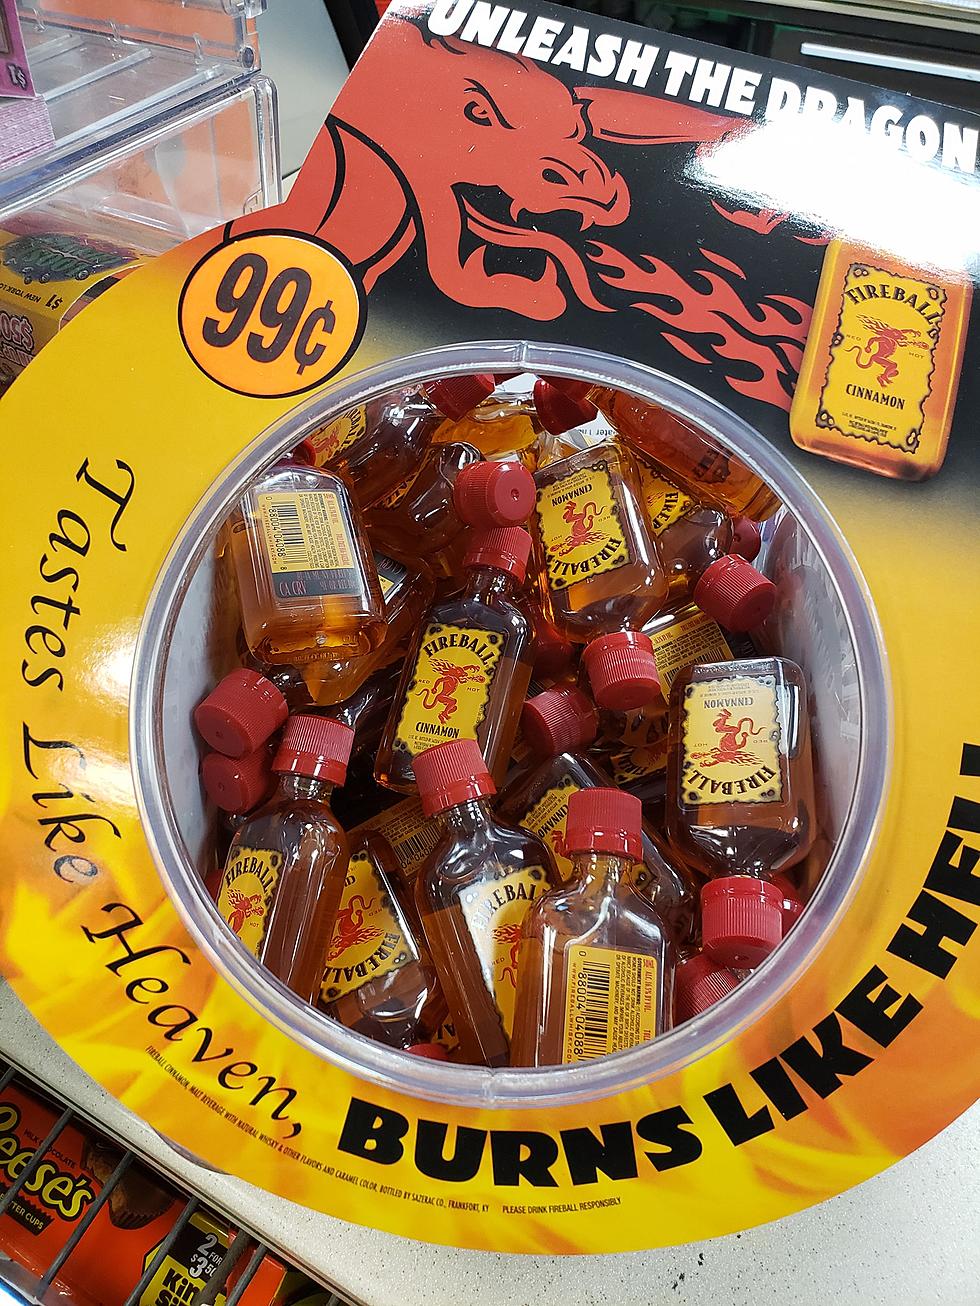 Wait? Can You Buy Fireball at Gas Stations and Grocery Stores Now?